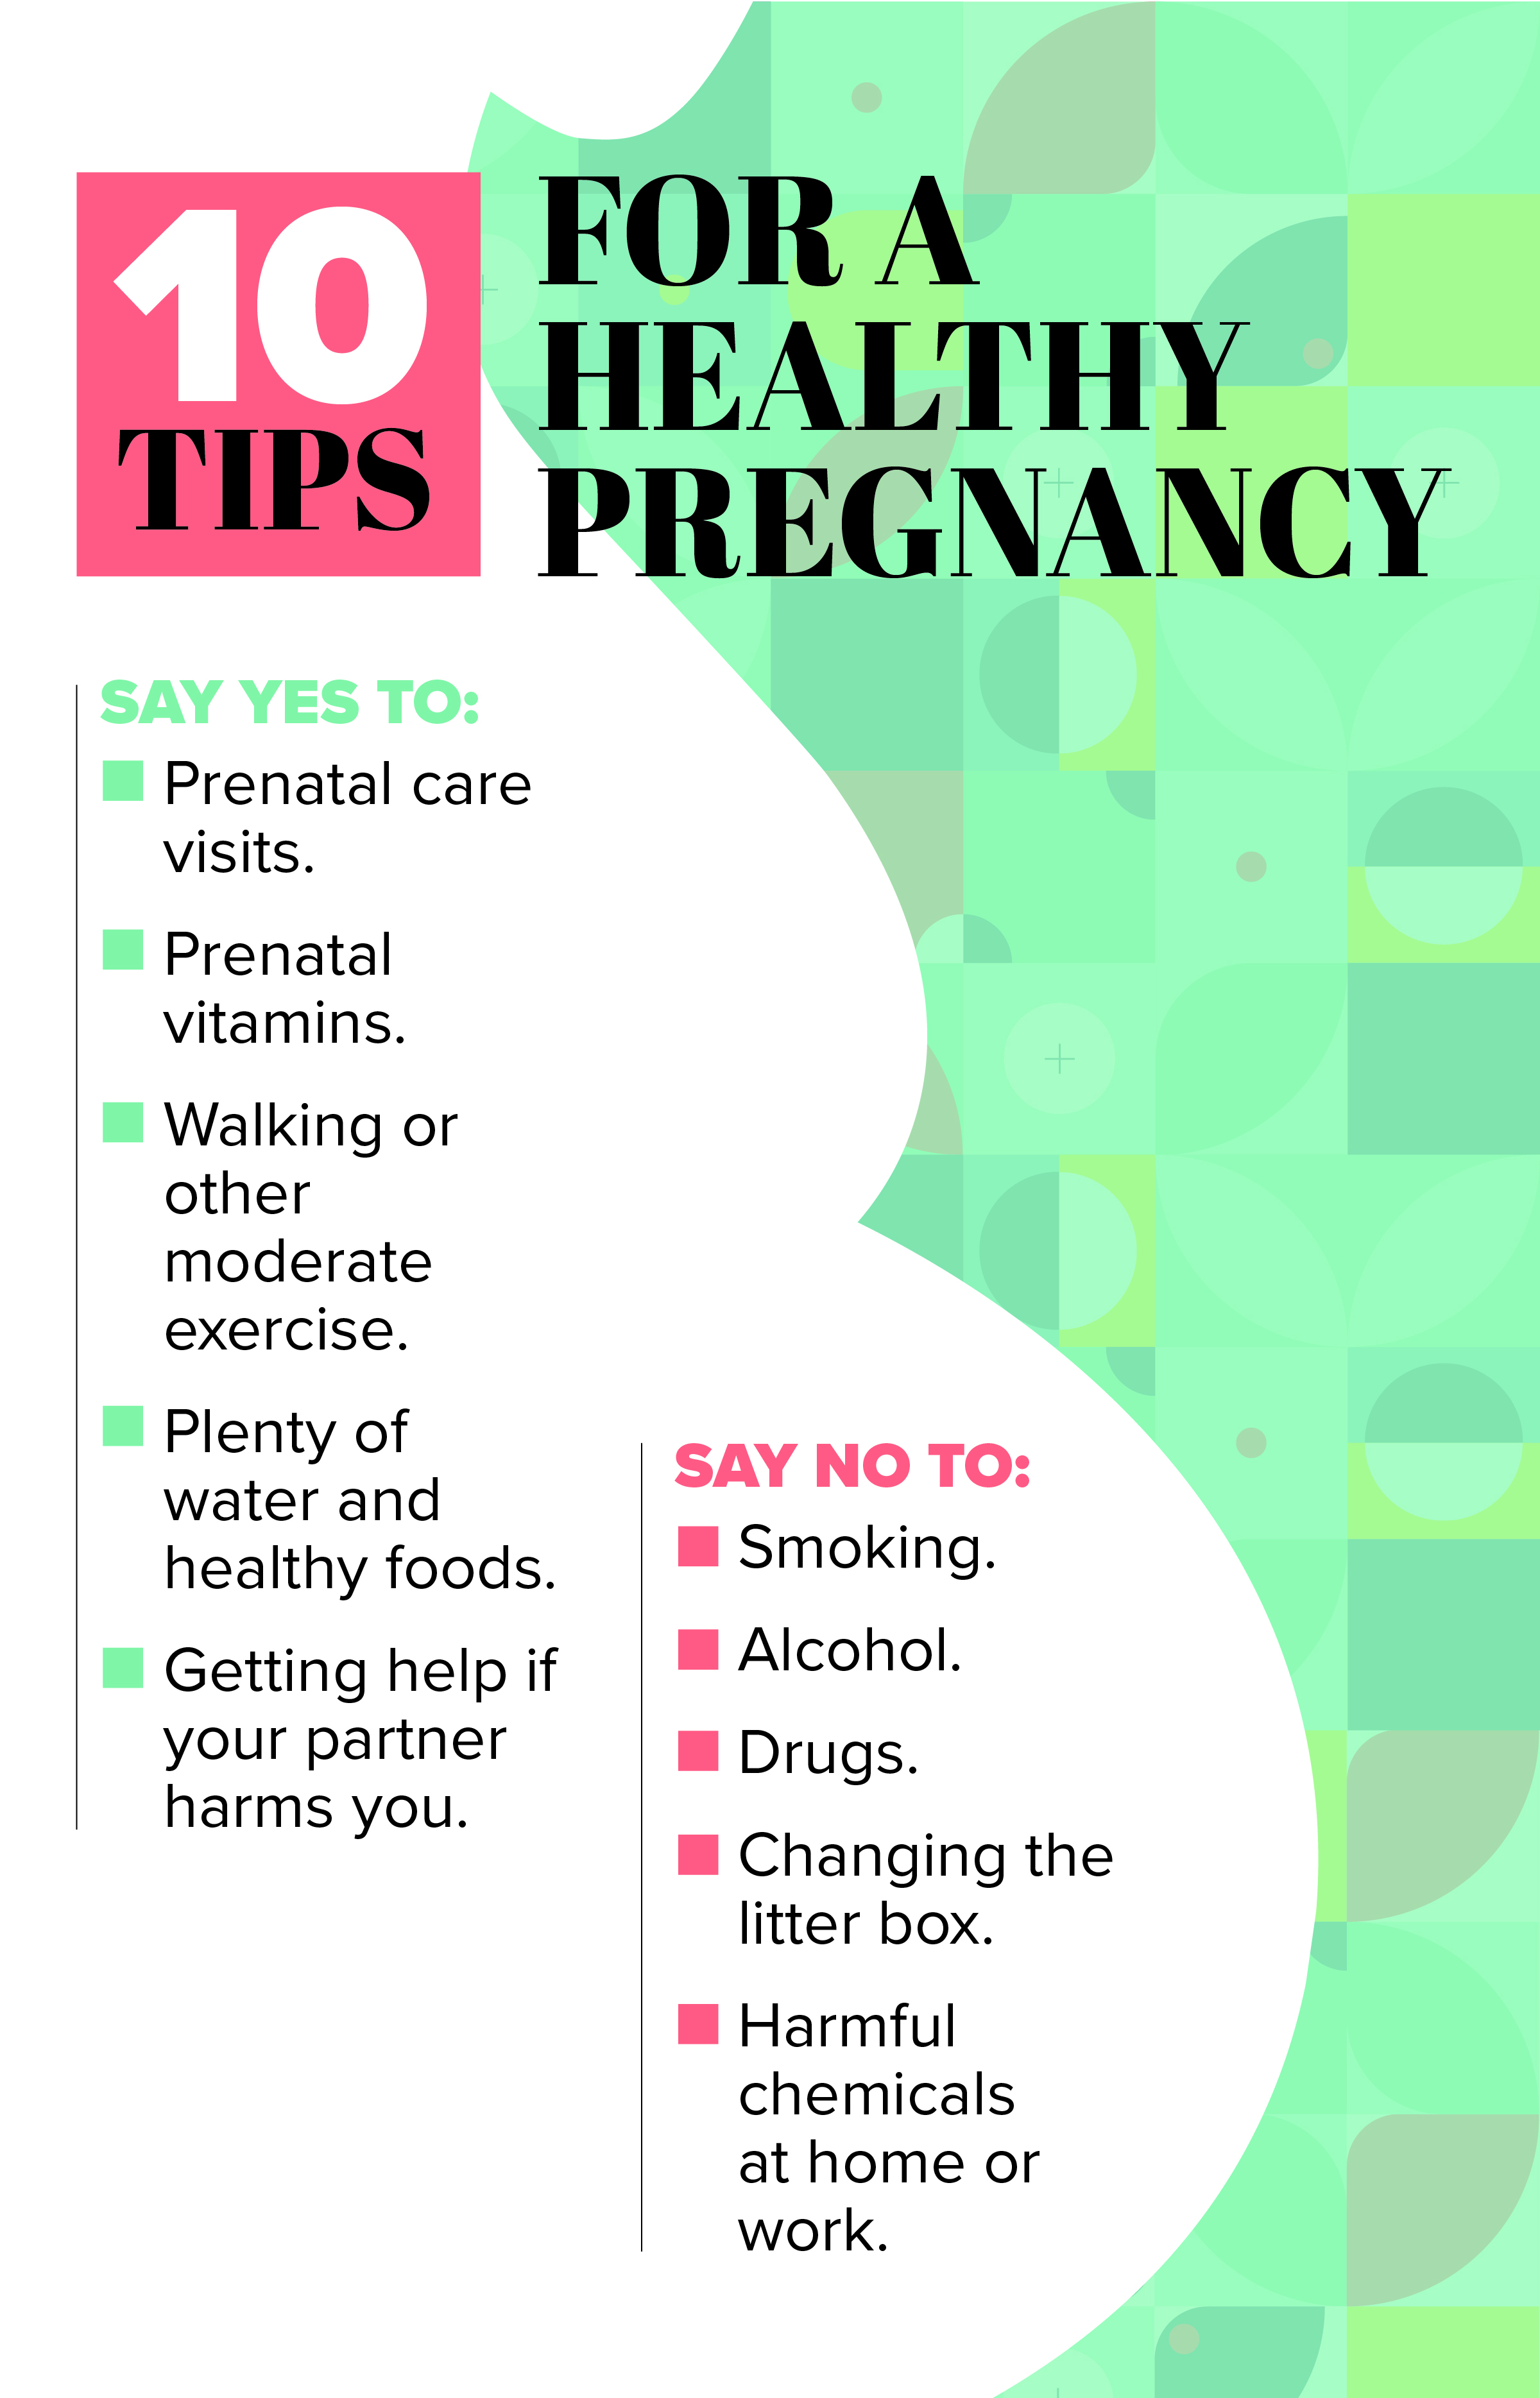 10 Ways To Have A Healthy Pregnancy Indiana Regional Medical Center